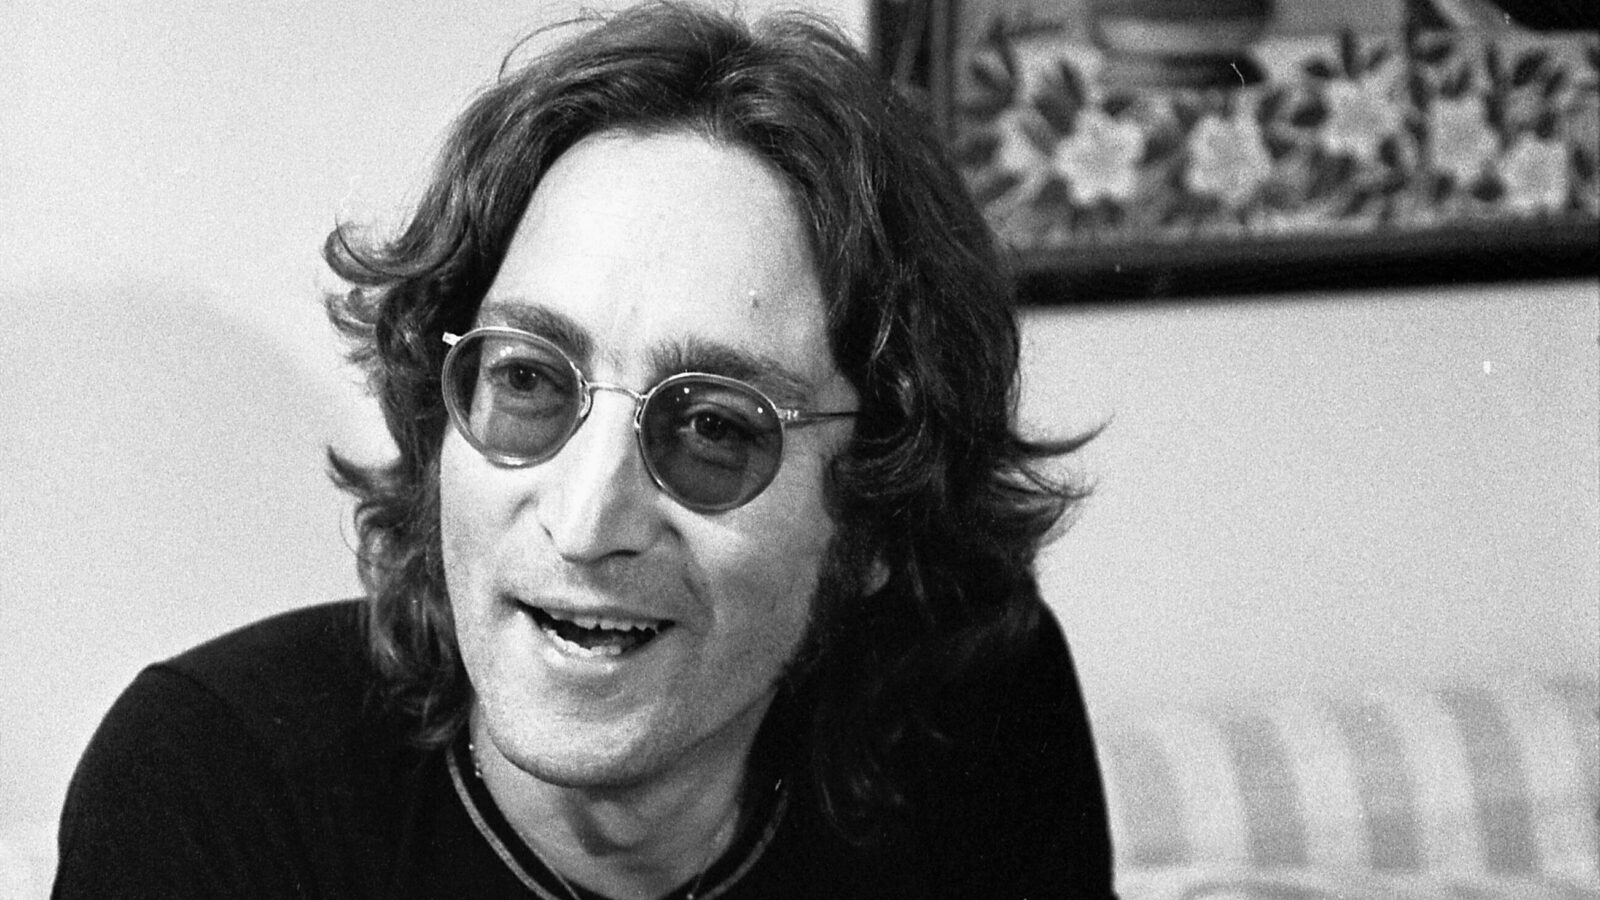 John Lennon, with long hair and his signature round glasses, smiles